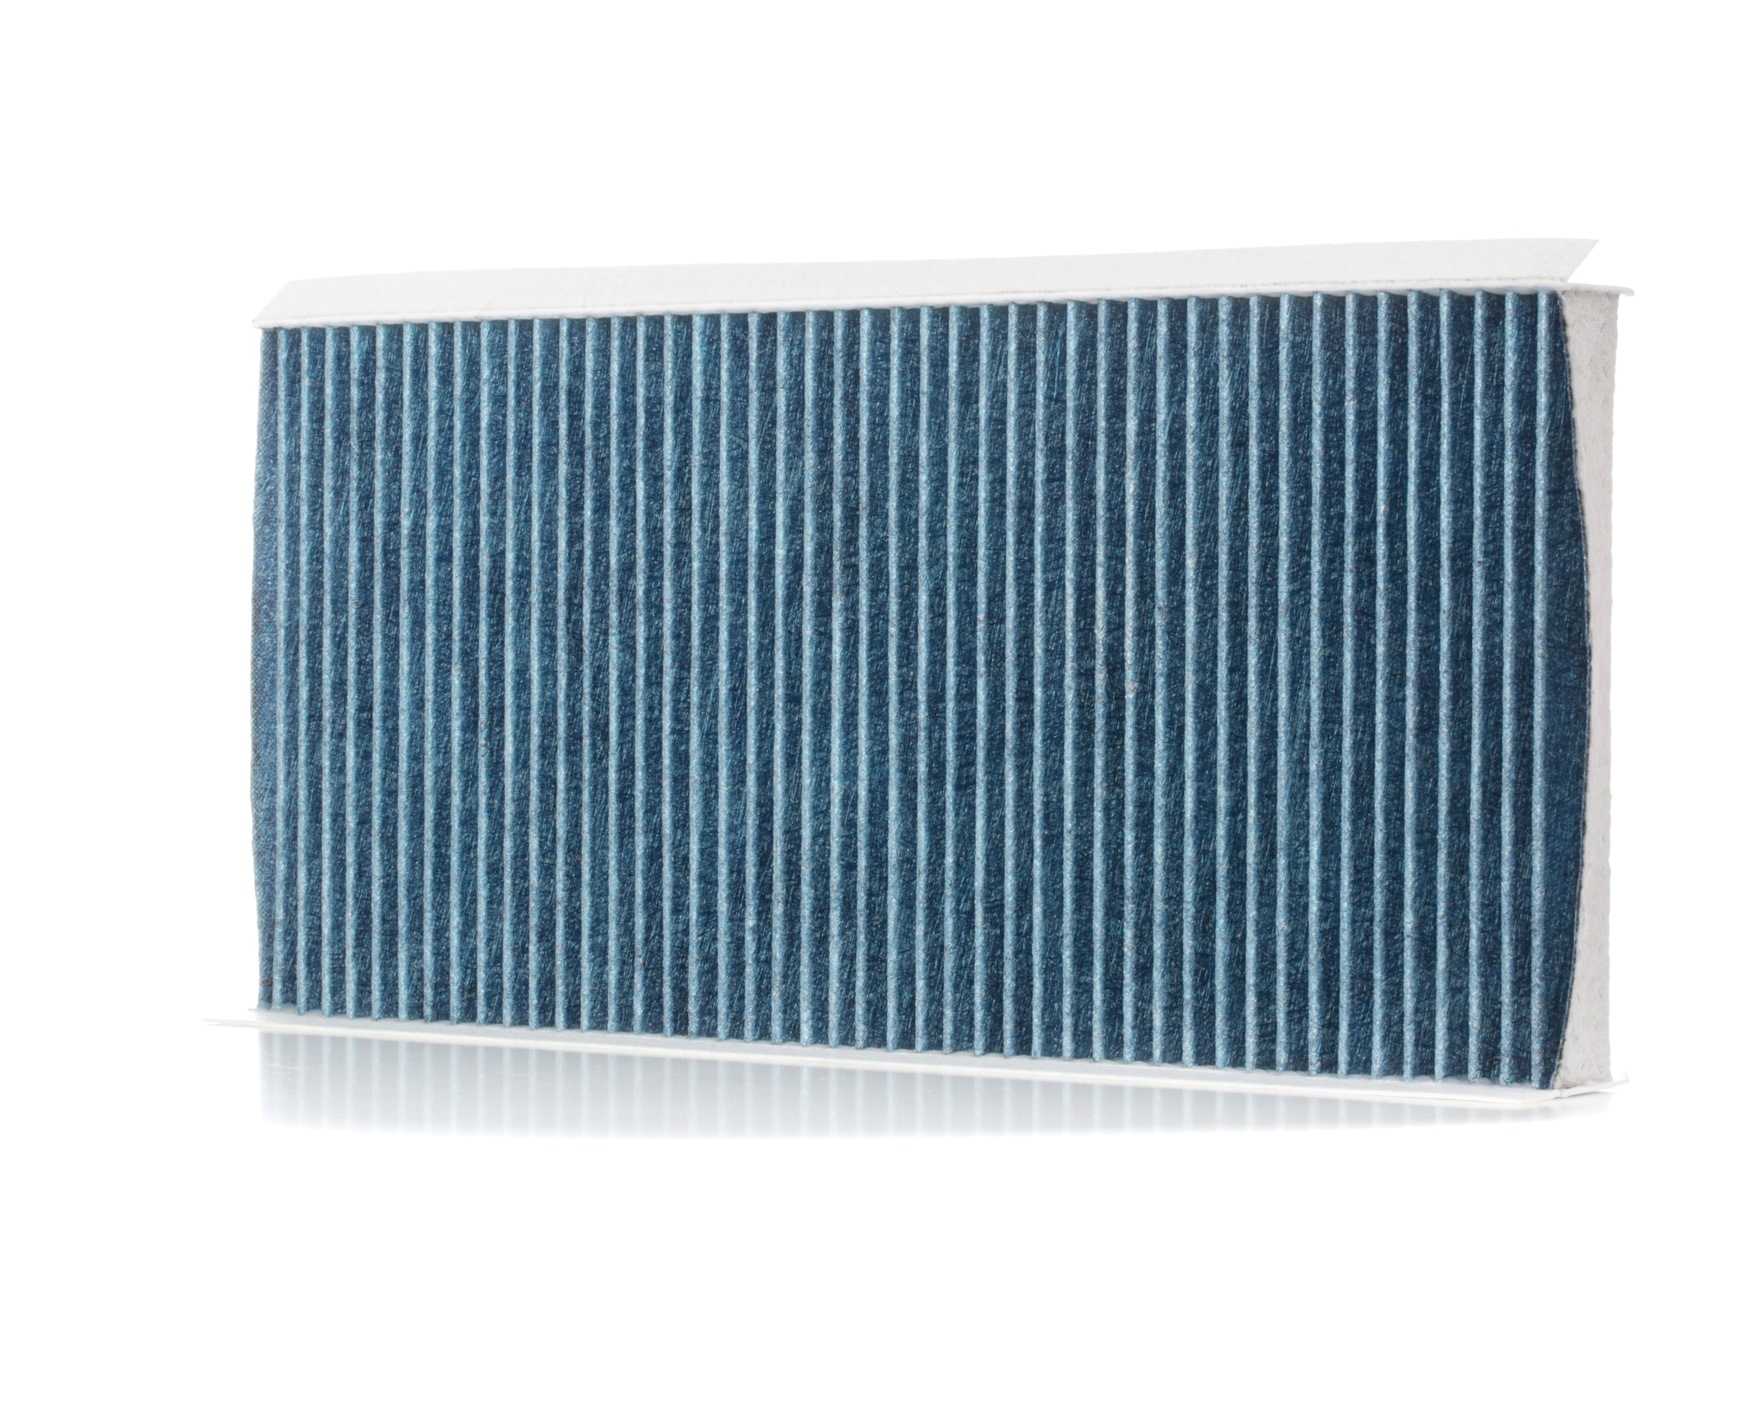 STARK SKIF-0170515 Pollen filter with anti-allergic effect, with antibacterial action, Particulate filter (PM 2.5), with Odour Absorbent Effect, 394 mm x 184 mm x 32,0 mm